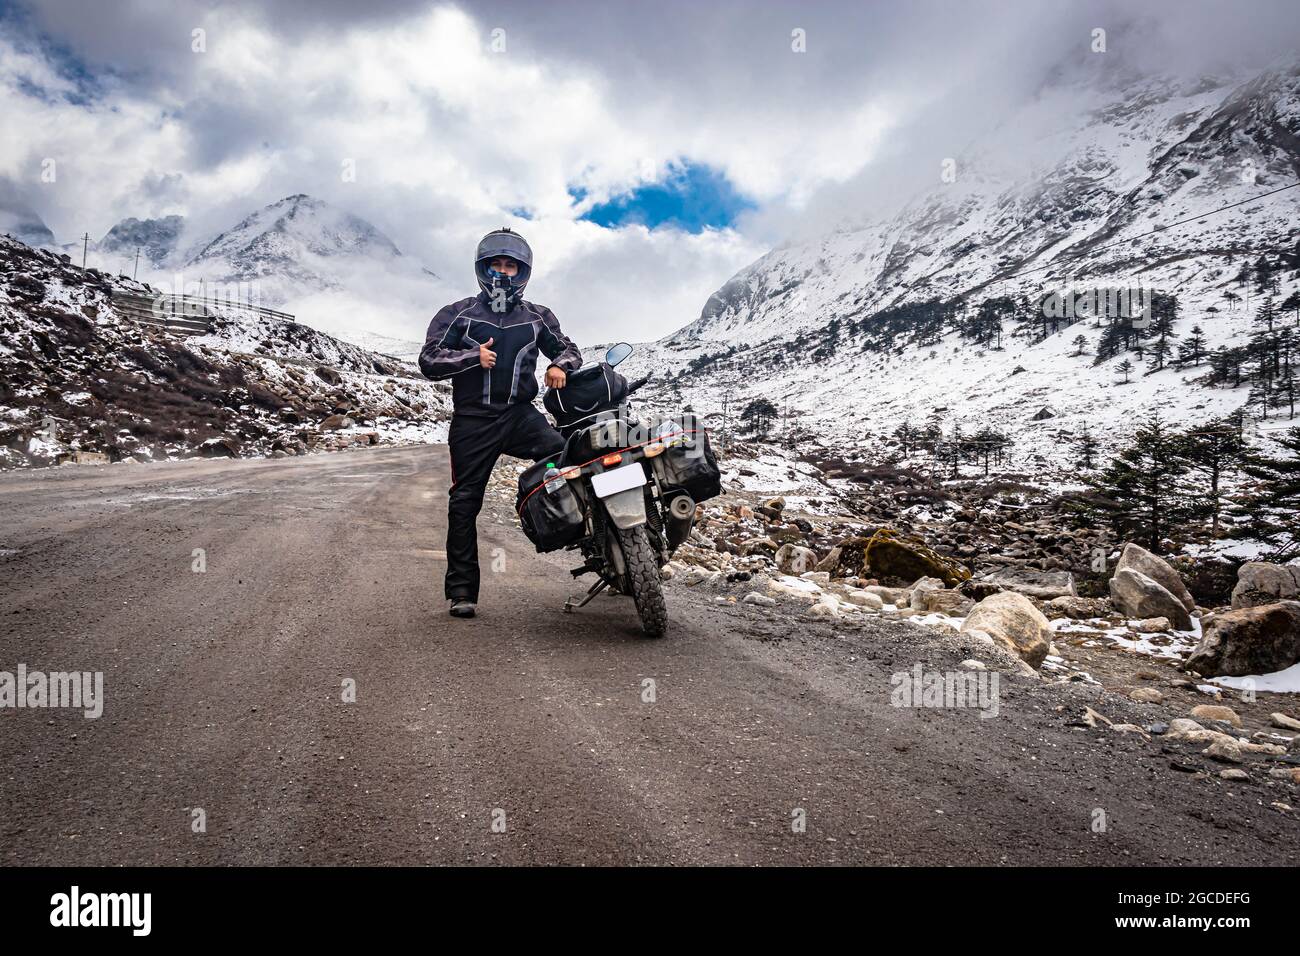 man solo ridder in ridding gears with loaded motorcycle at isolated road and snow cap mountains image is taken at sela pass tawang arunachal pradesh. Stock Photo